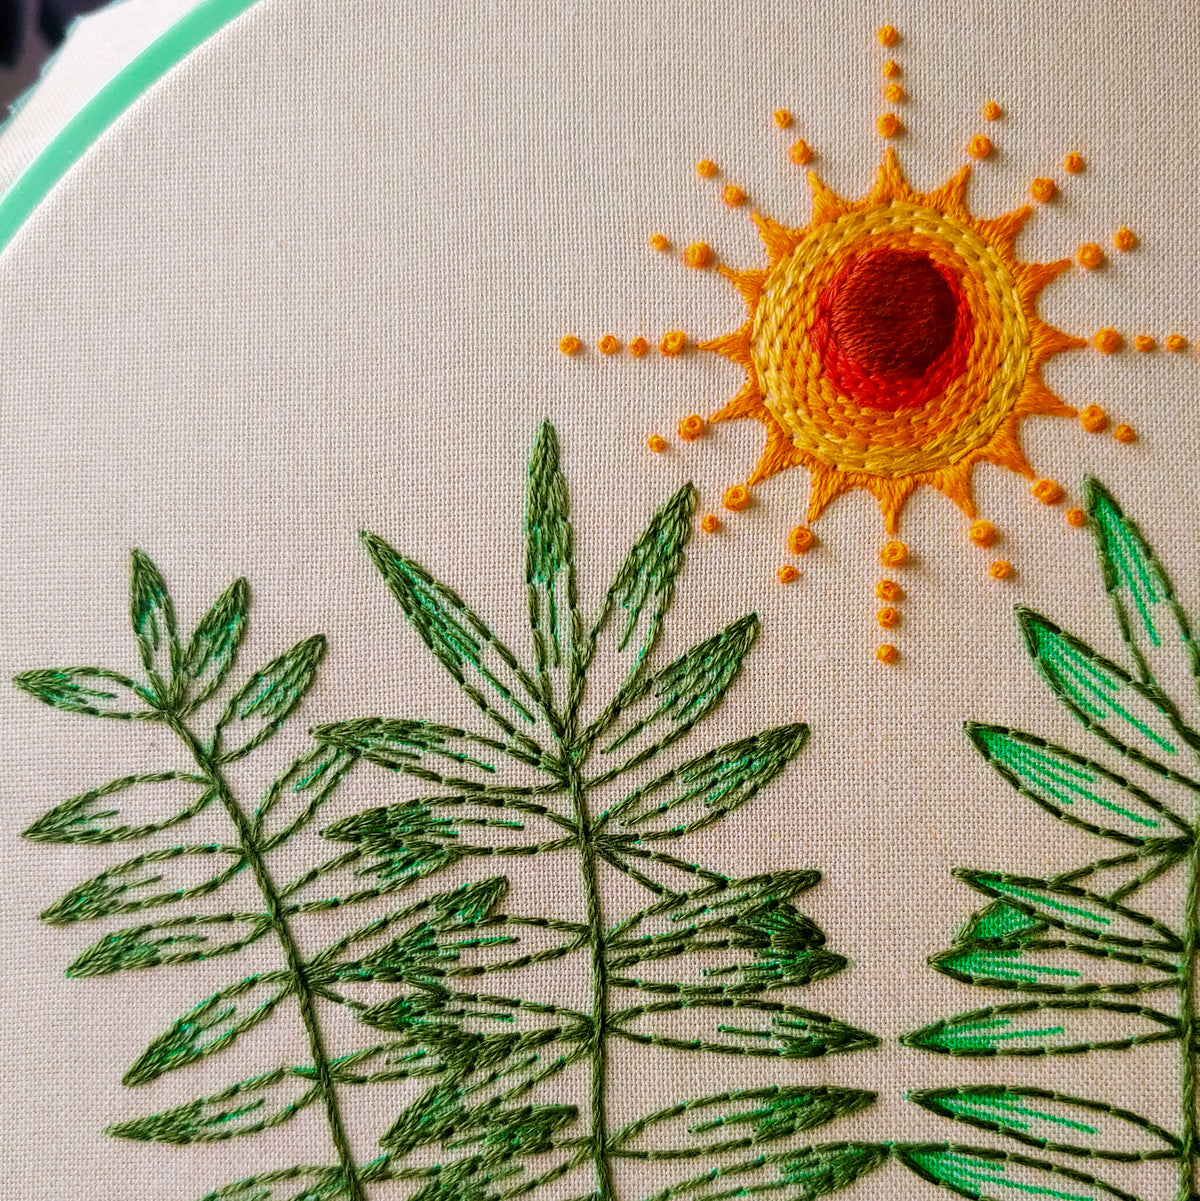 High Noon Hand Embroidery Kit